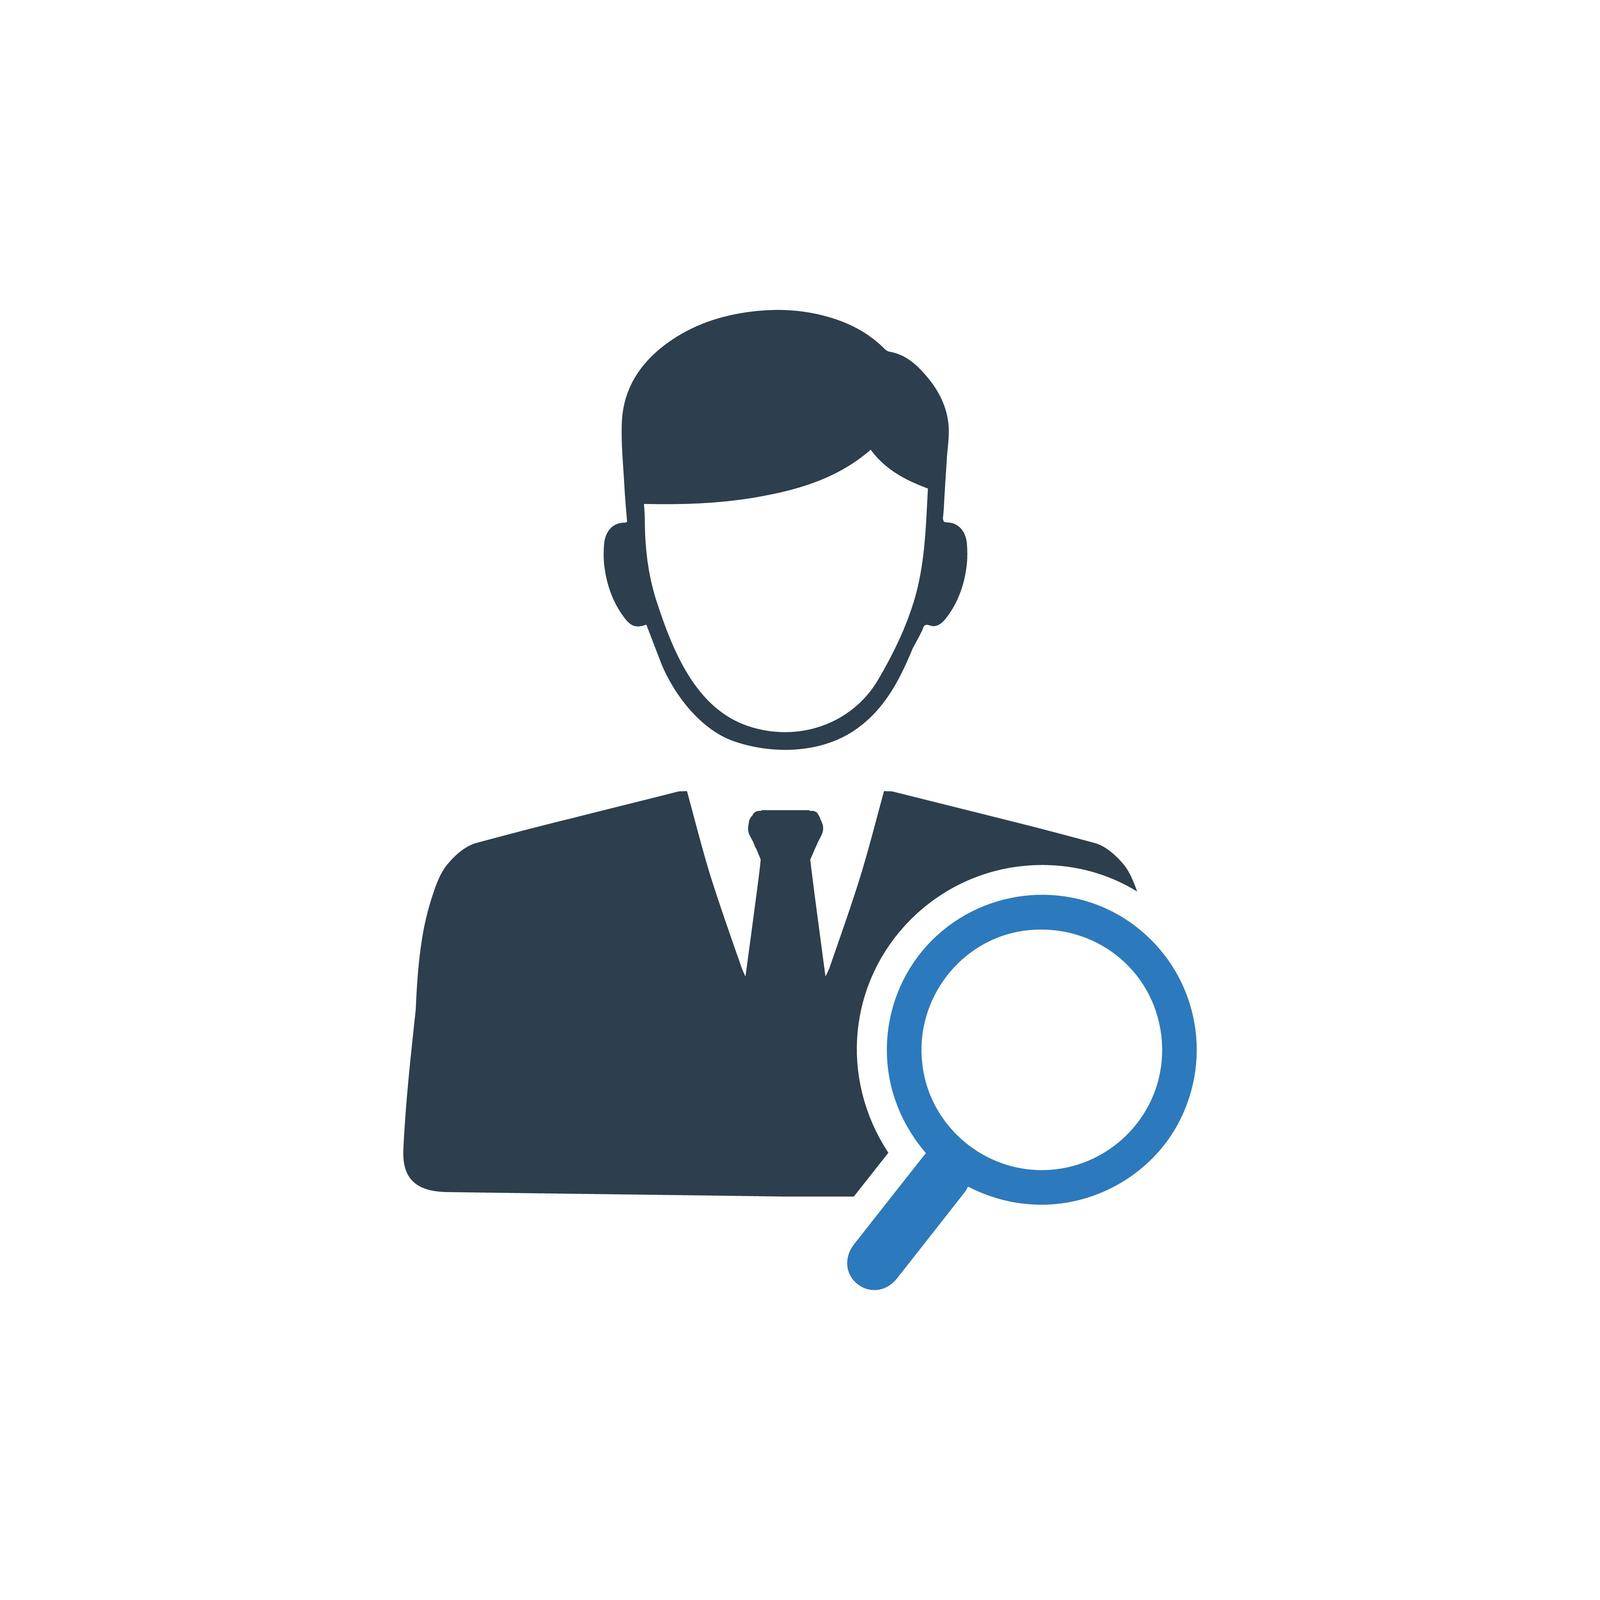 Find Employee icon. Meticulously designed vector EPS file.